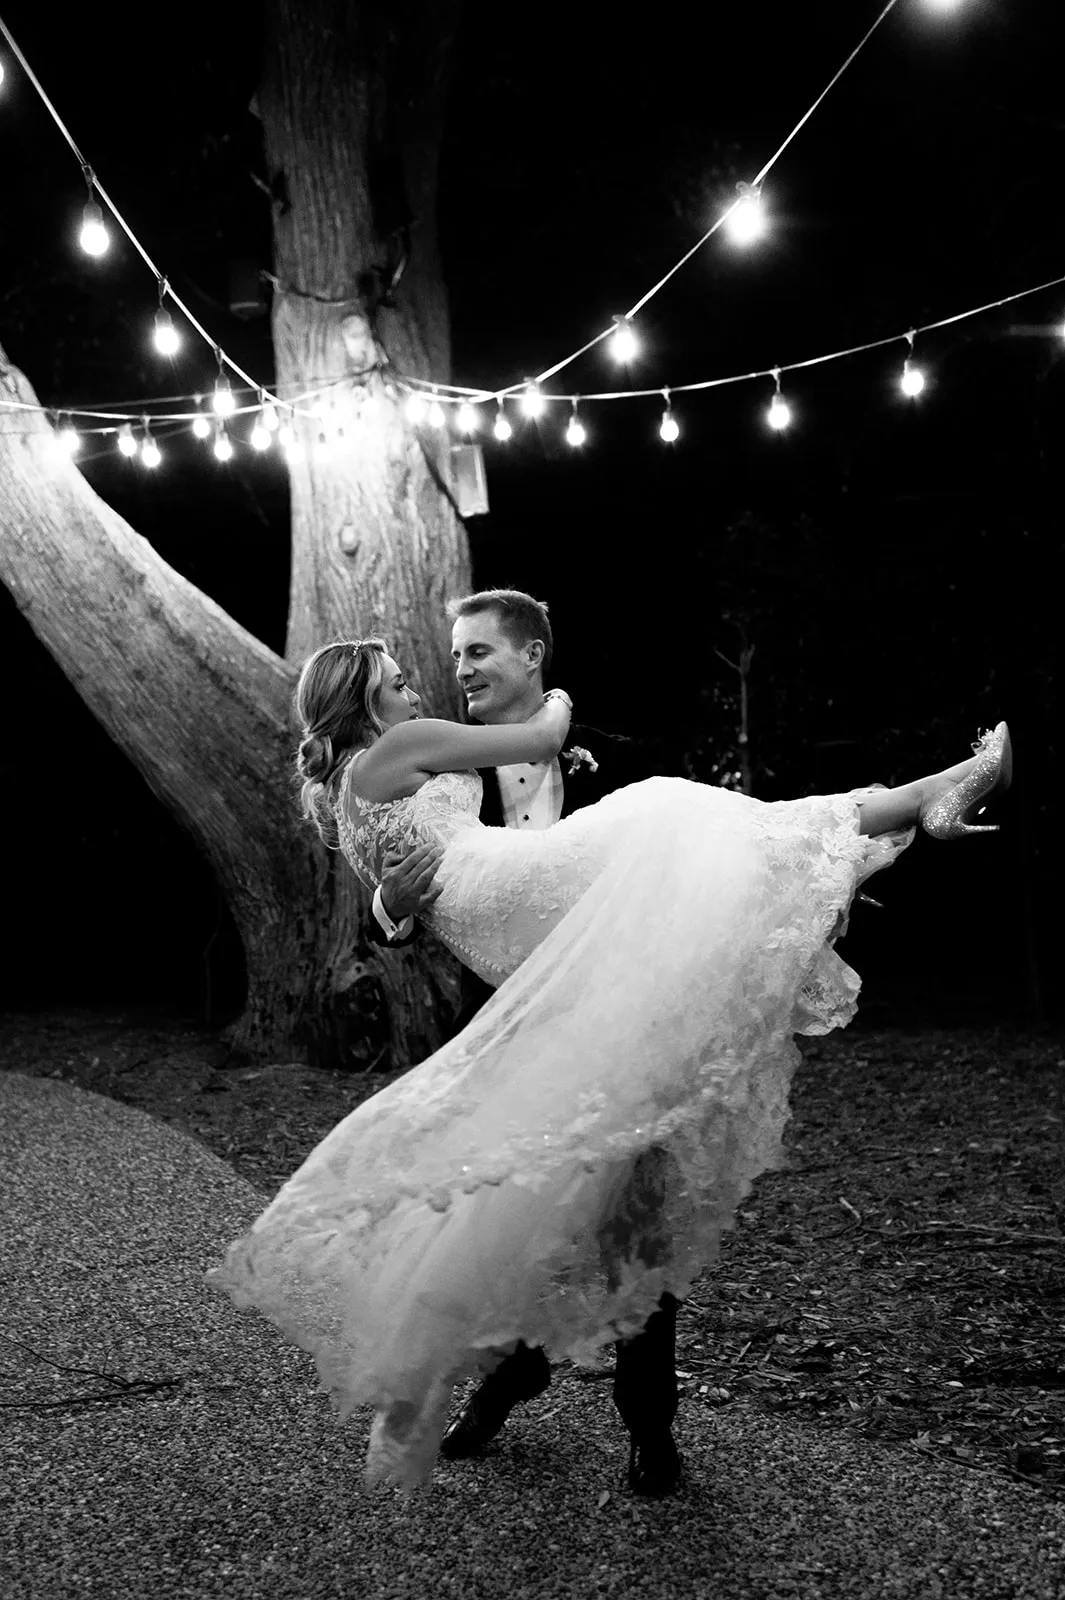 Bride and groomd dancing at night